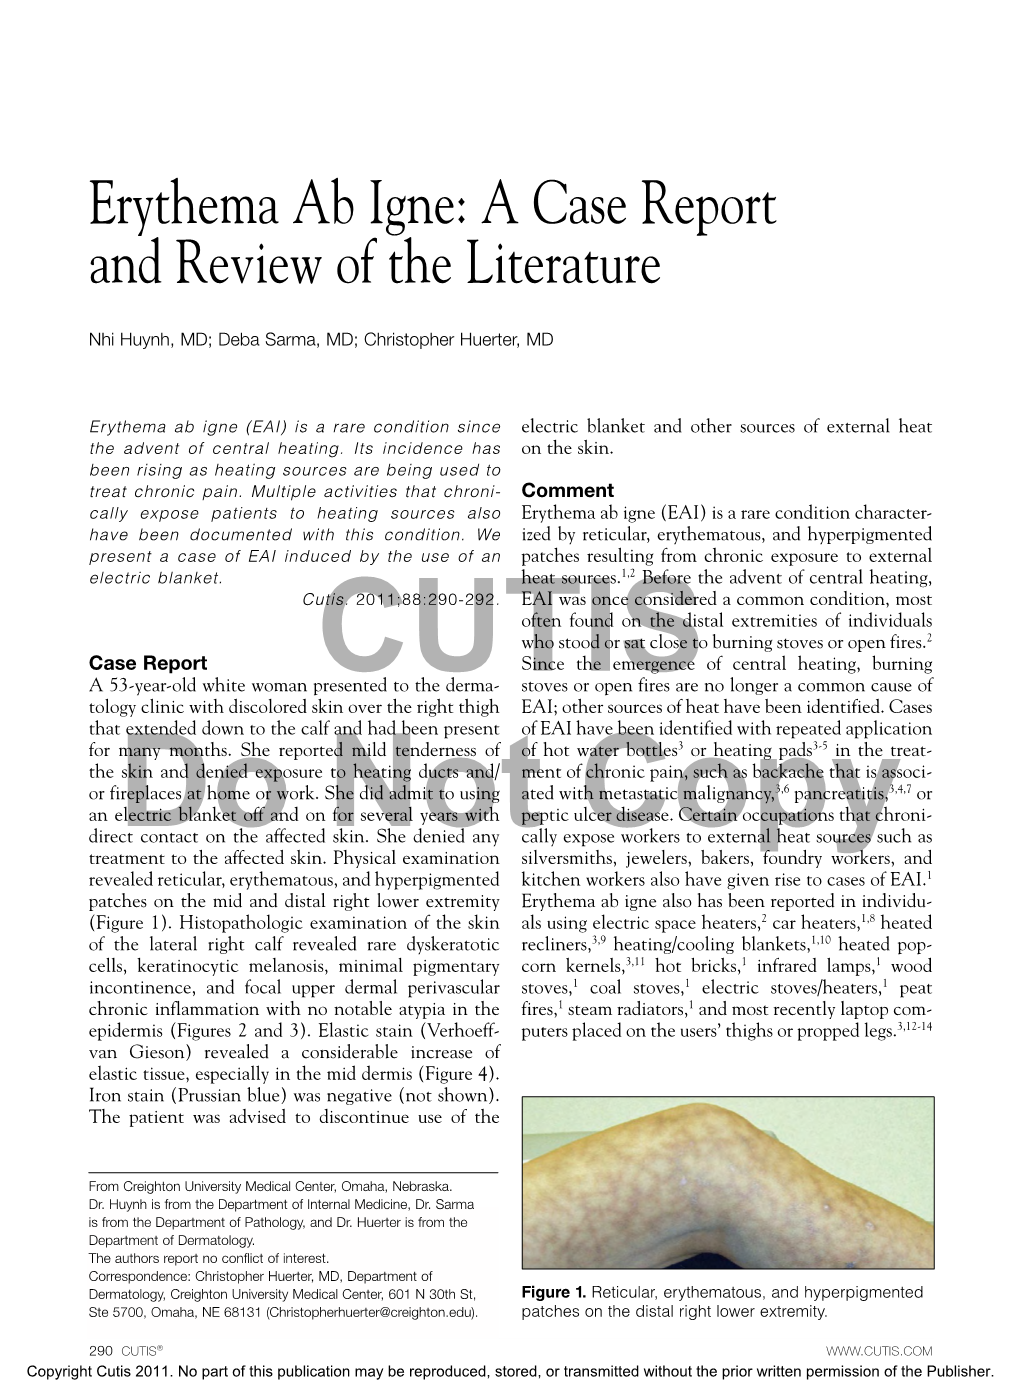 Erythema Ab Igne: a Case Report and Review of the Literature